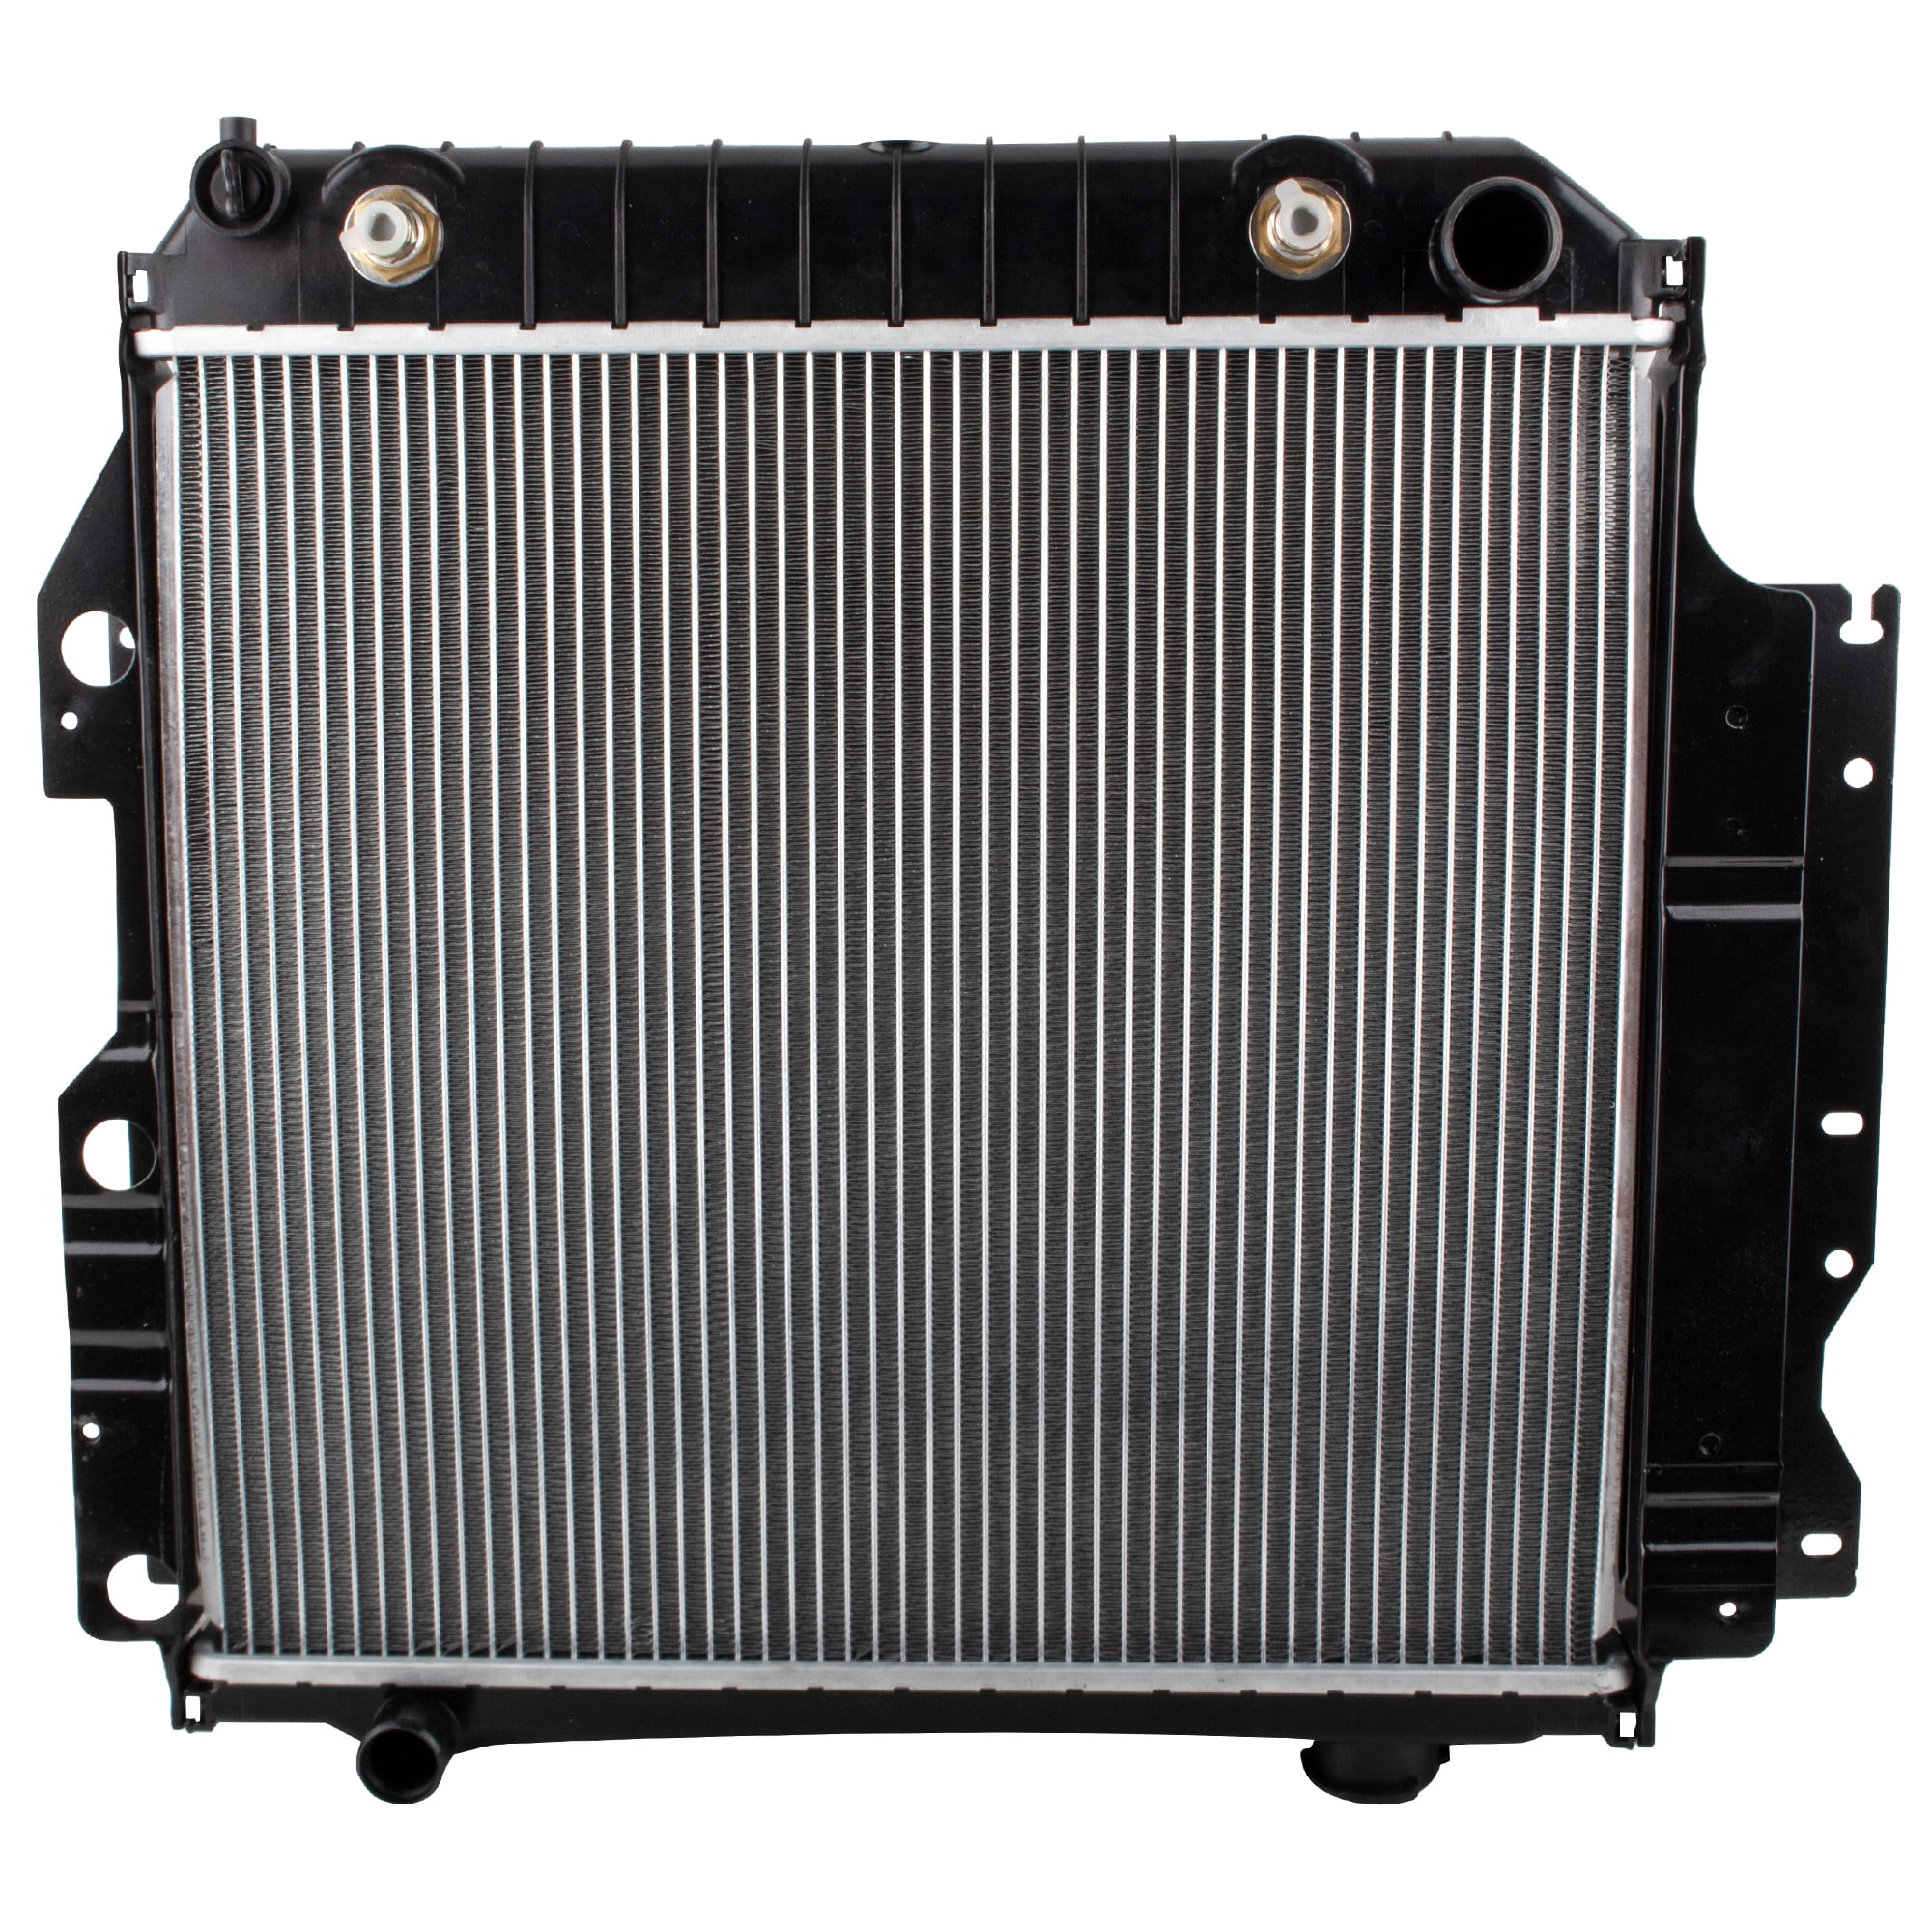 BOXI Radiator Direct Replacement Assembly for 2006 Jeep TJ / 1987-2006 Jeep  Wrangler 4CYL   / V6   (Replaces CU1682 CH3010221  040876420151 52028120) 